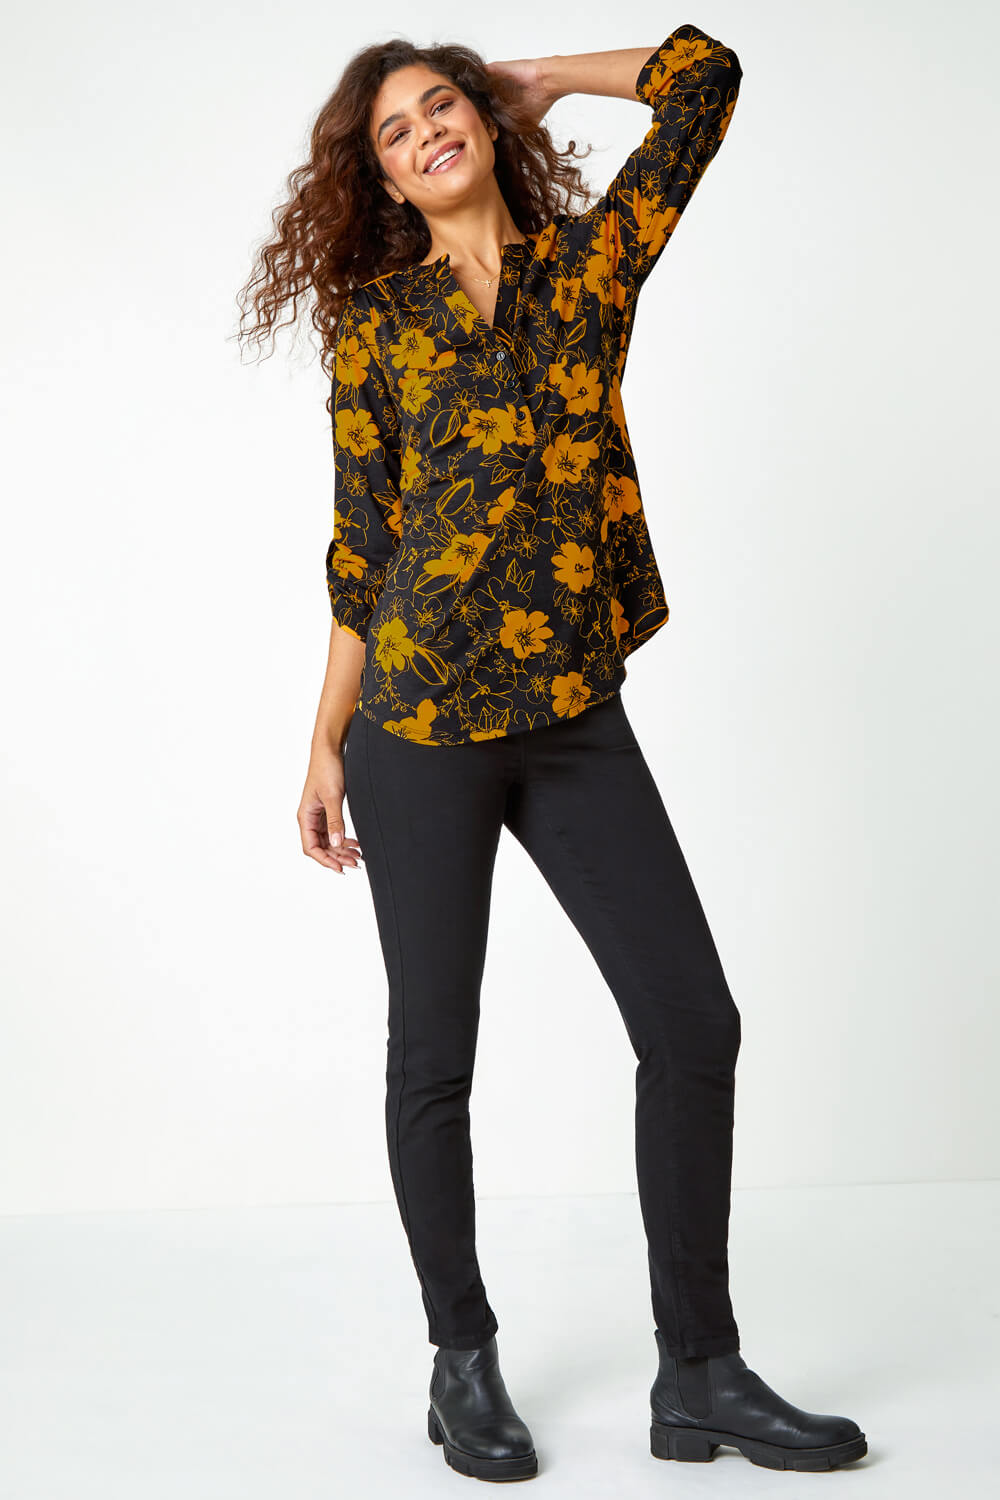 Ochre Floral Print Stretch Shirt, Image 2 of 5